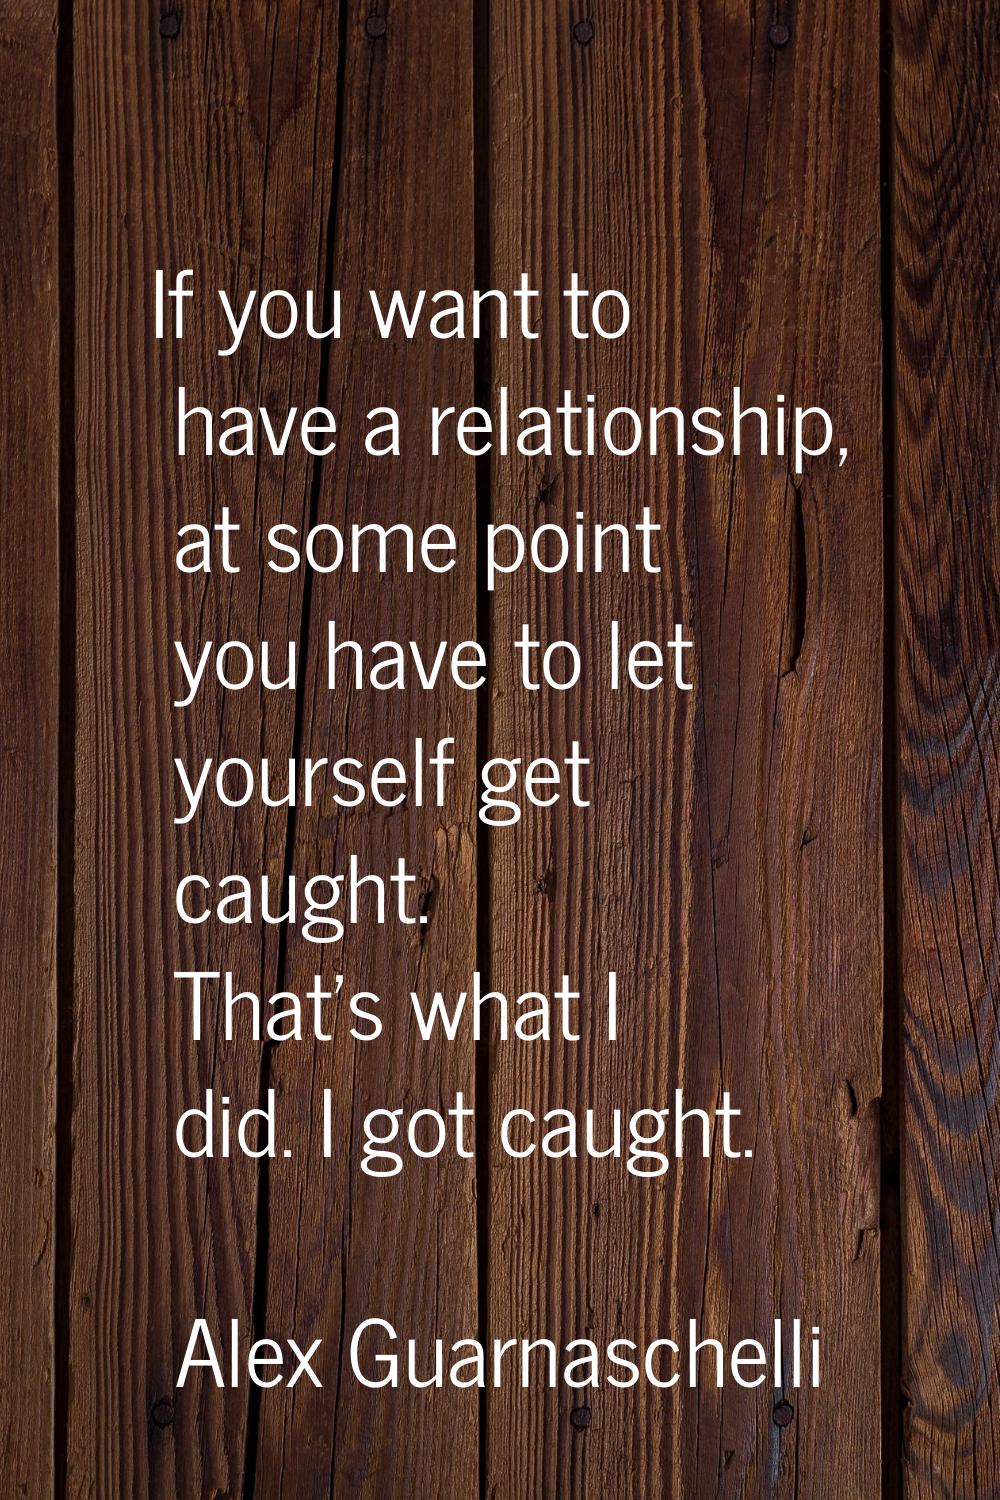 If you want to have a relationship, at some point you have to let yourself get caught. That's what 